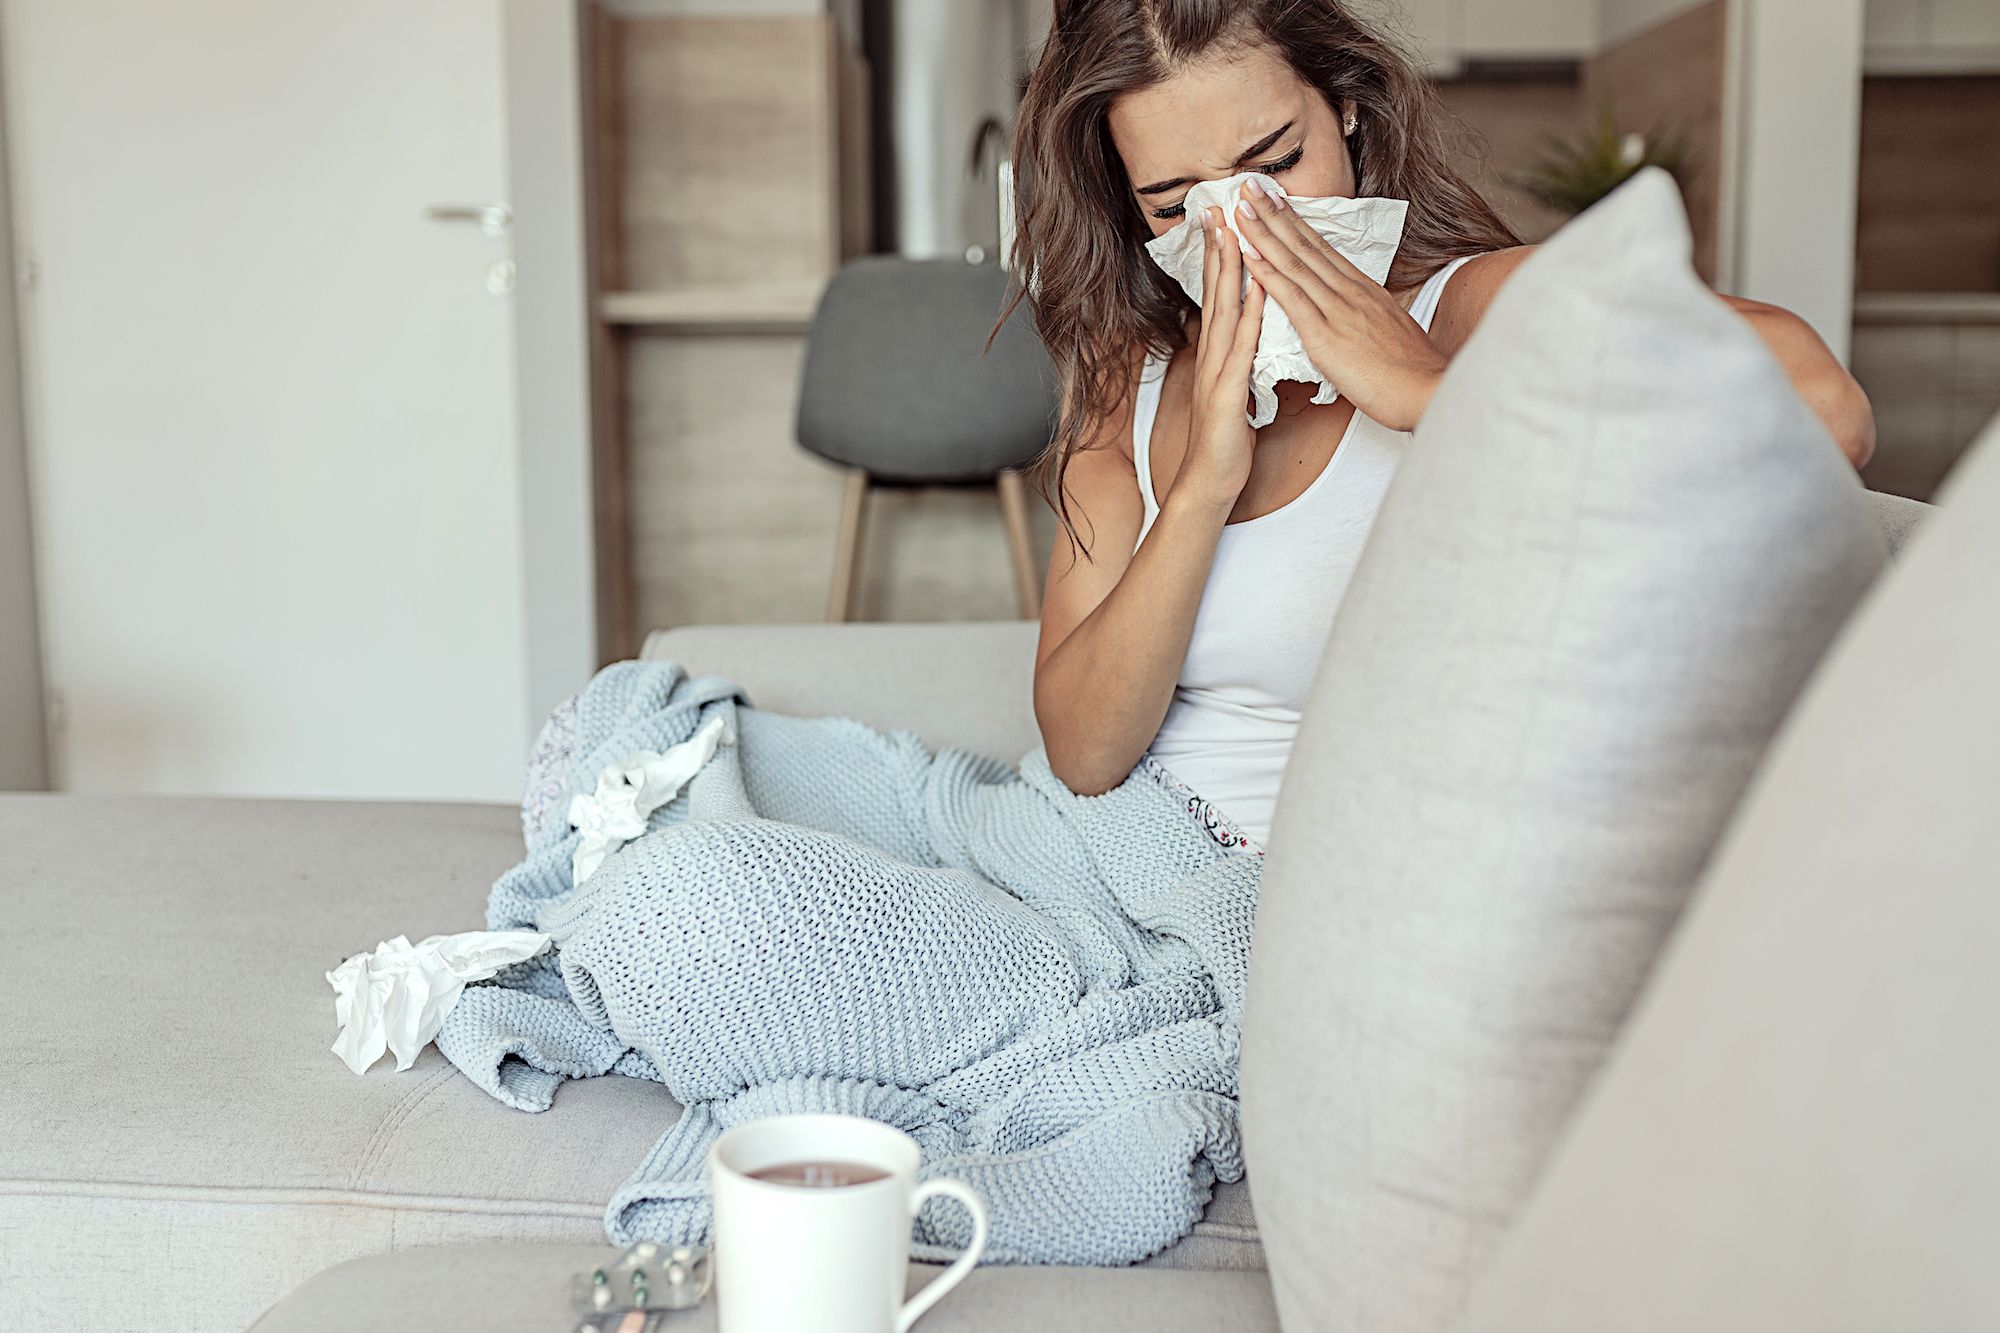 Ever delayed getting sick? This is why we get ill when we relax